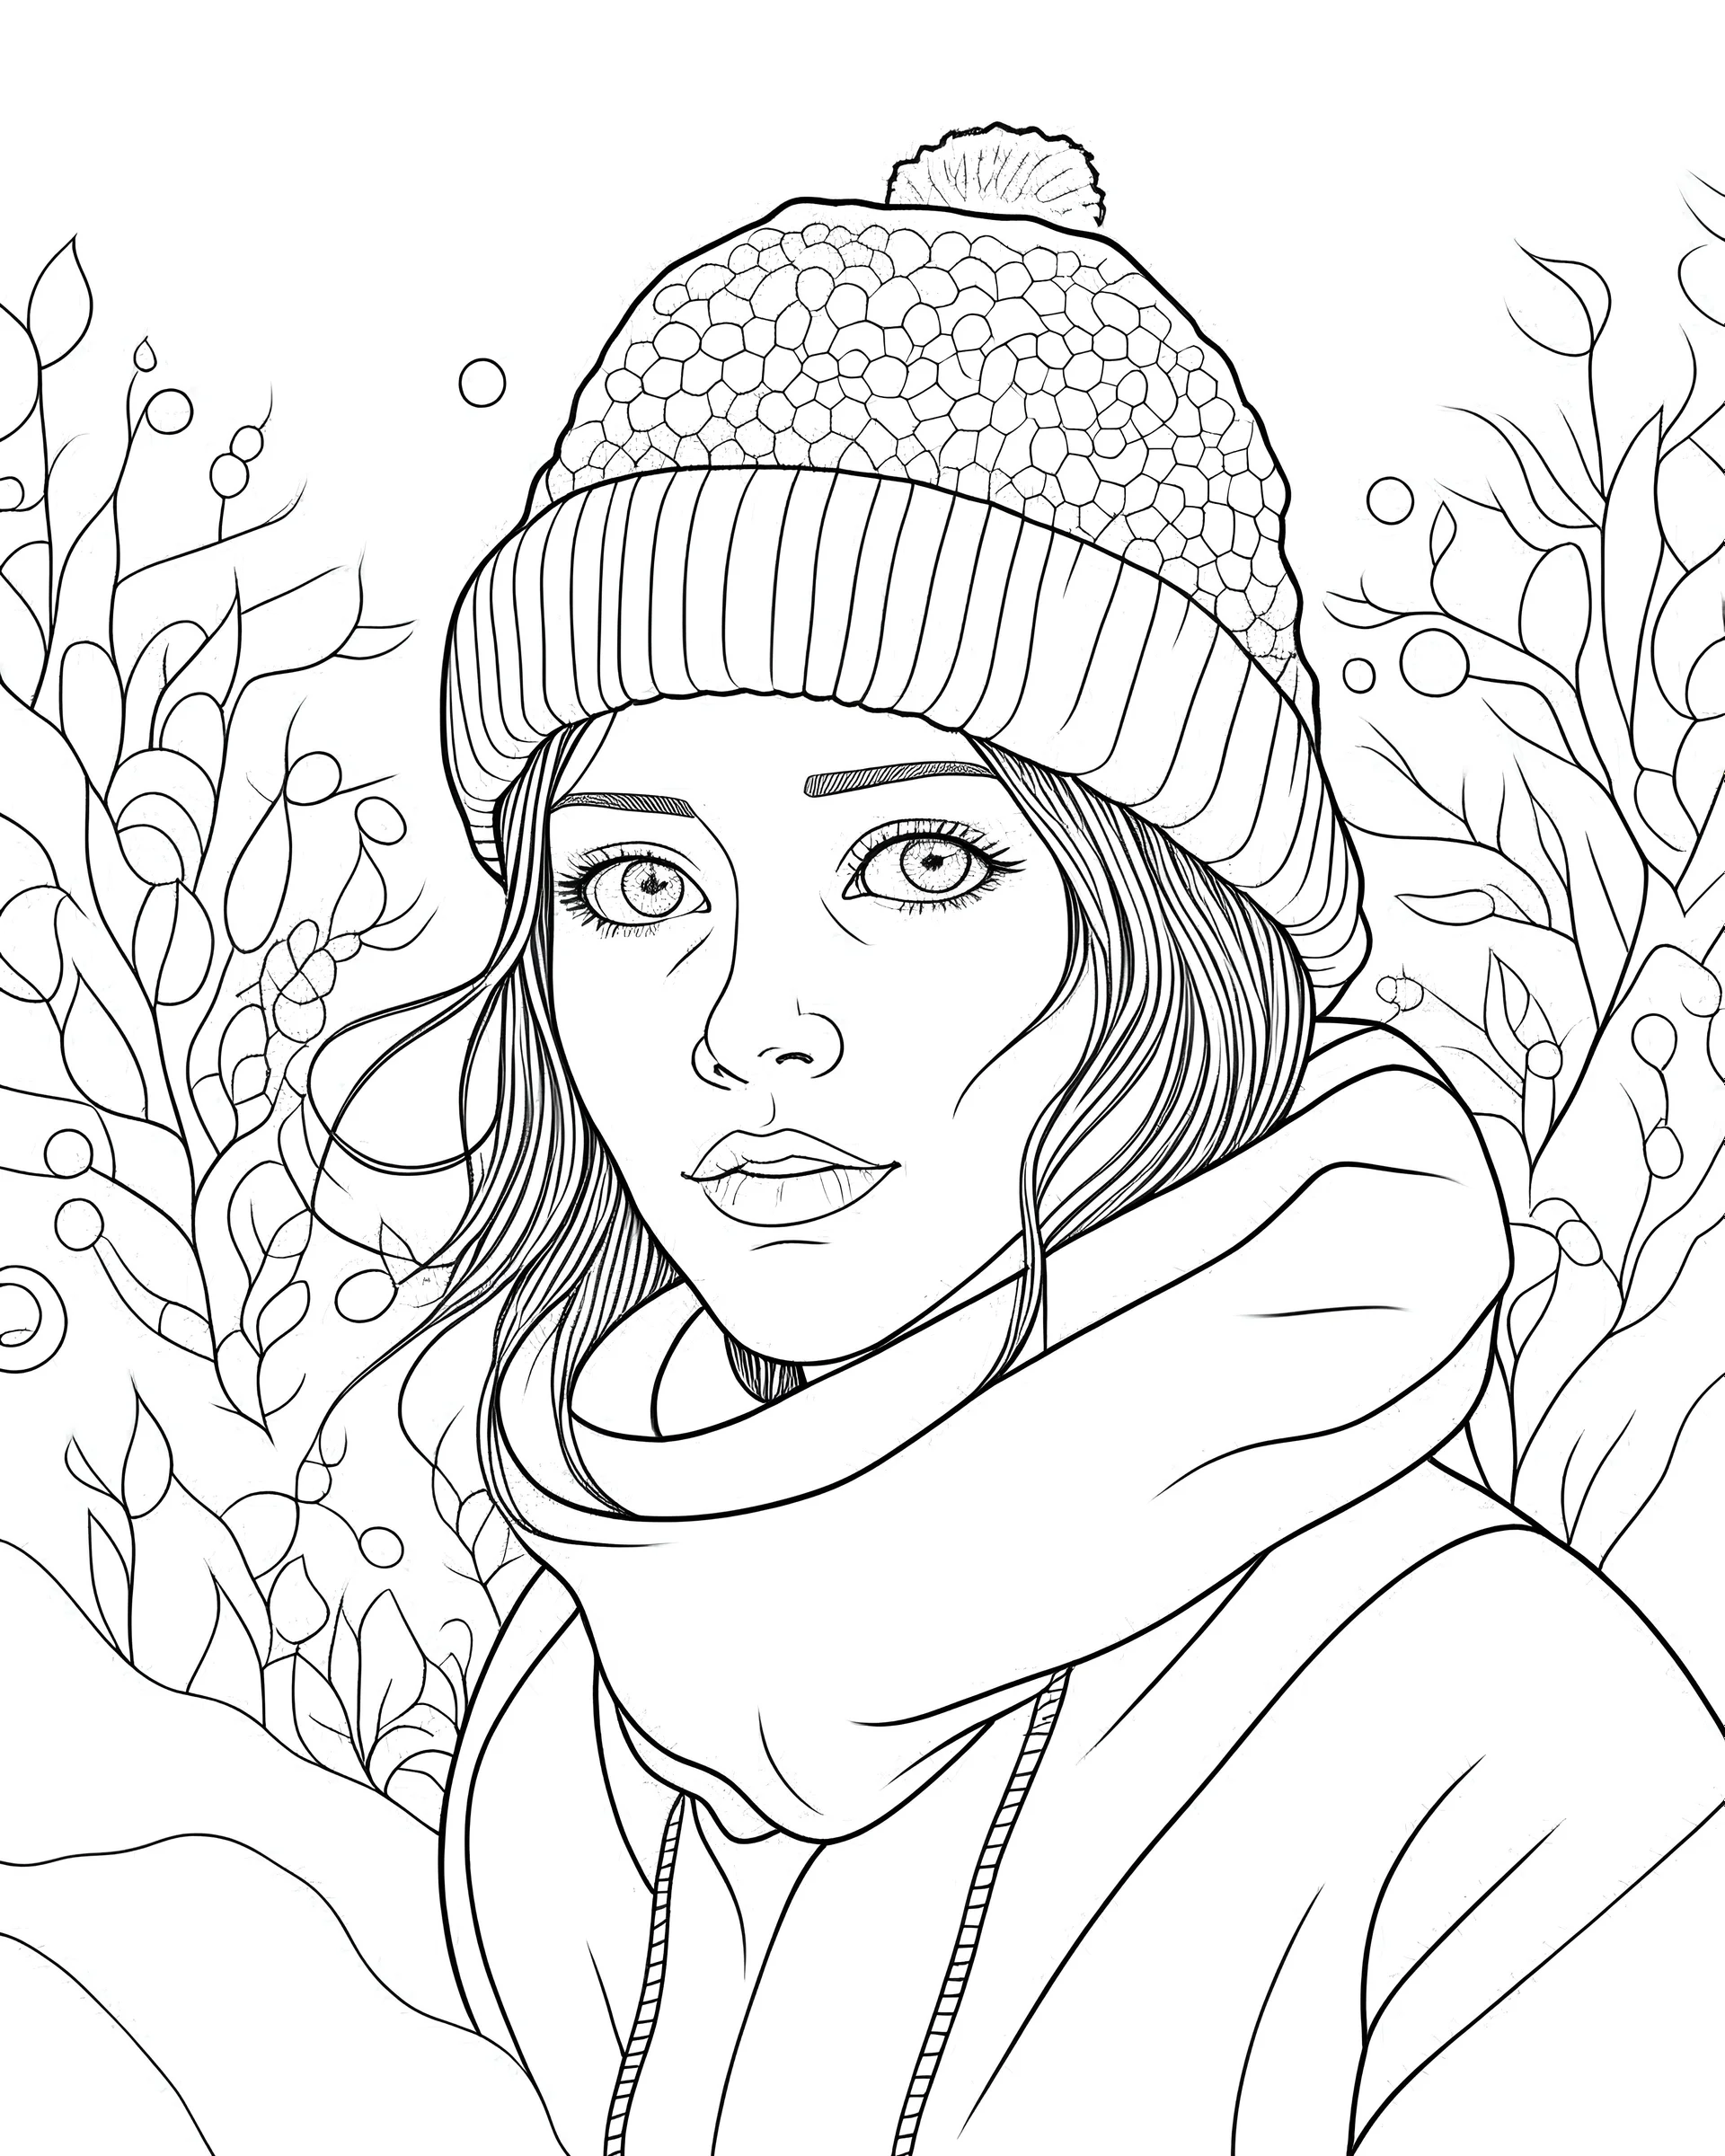 SNOW GARDEN, full view, realistic face, coloring page, only draw lines, coloring book, clean line art, –no sketch, color, –ar 3:4, white background, minimalistic black lines, minimal black color, low level black colors, coloring page, avoid thick black colors, thin black line art, avoid colors, perfect shape, perfect clear lines,